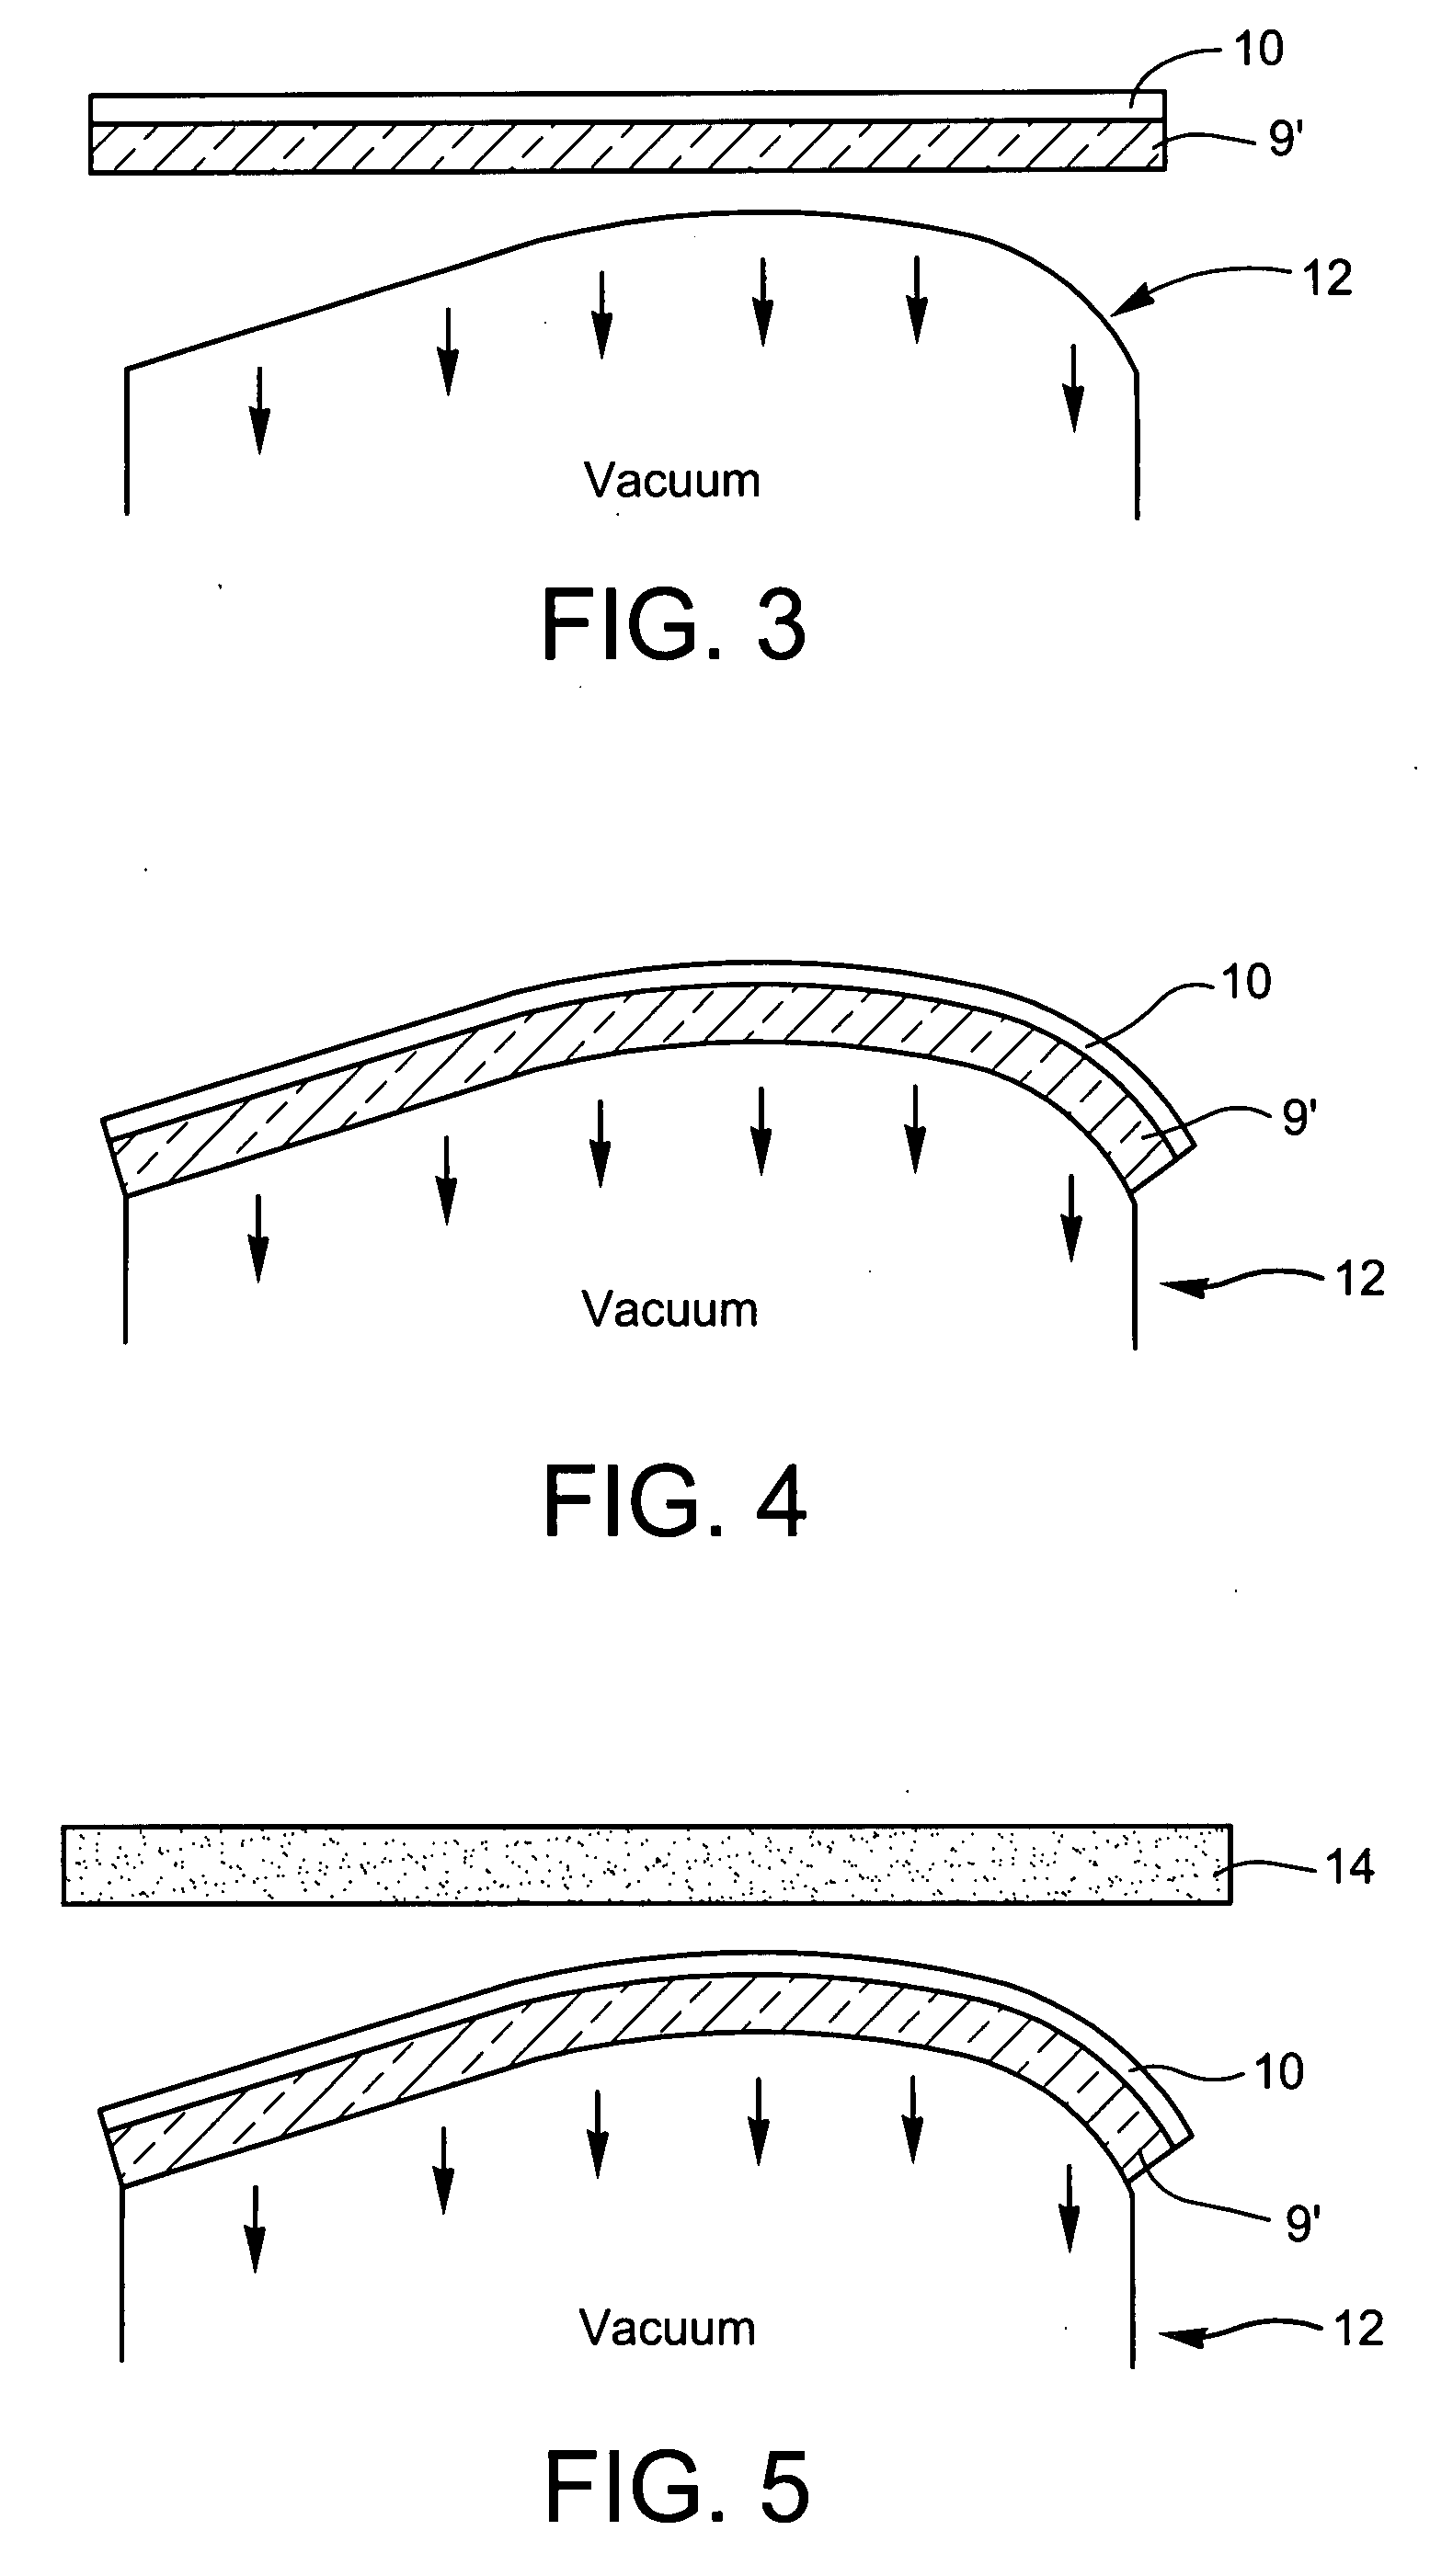 Parabolic trough or dish reflector for use in concentrating solar power apparatus and method of making same